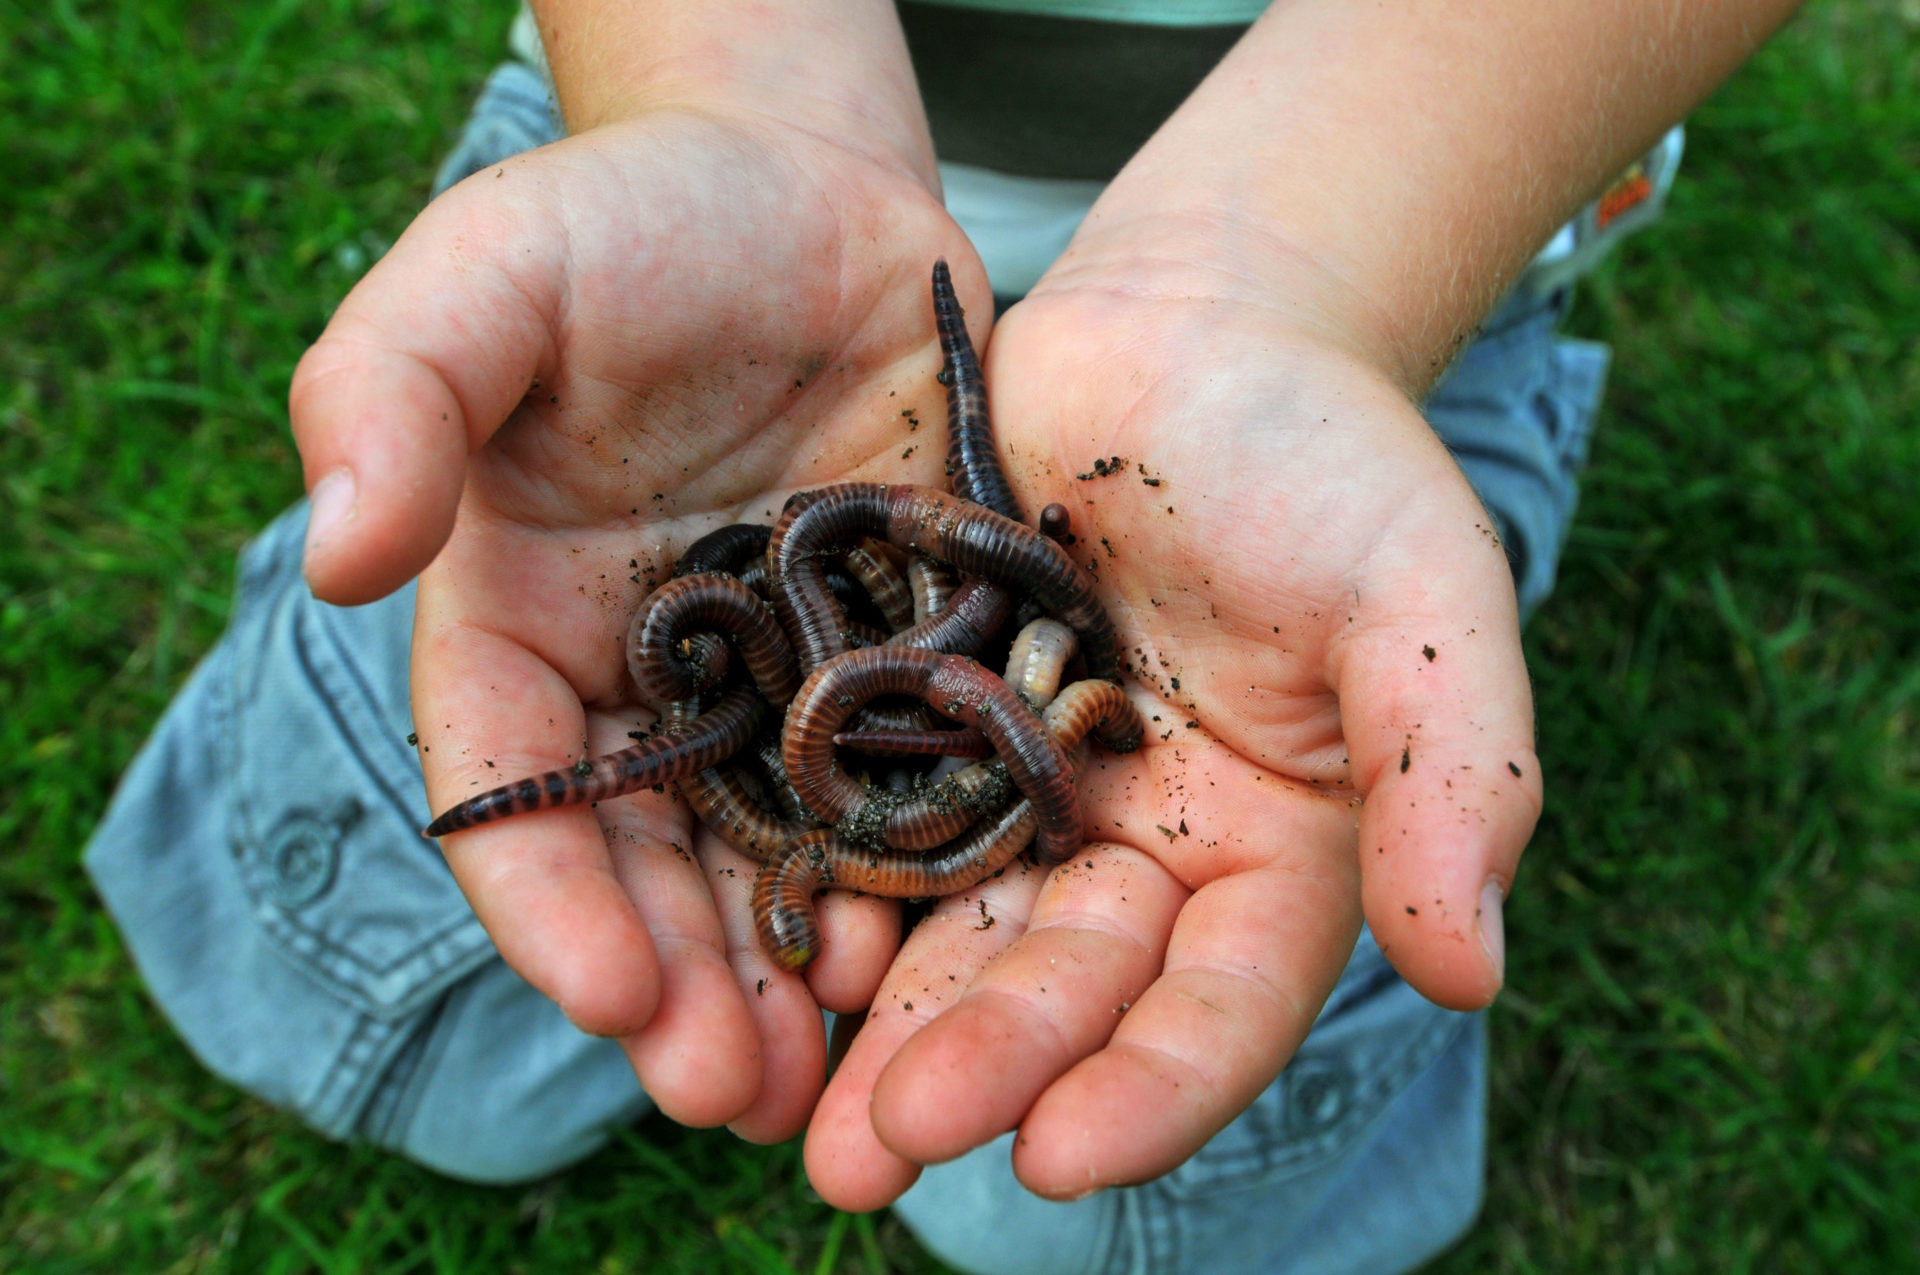 Child holding worms. Image: Finnbarr Webster / Alamy Stock Photo 